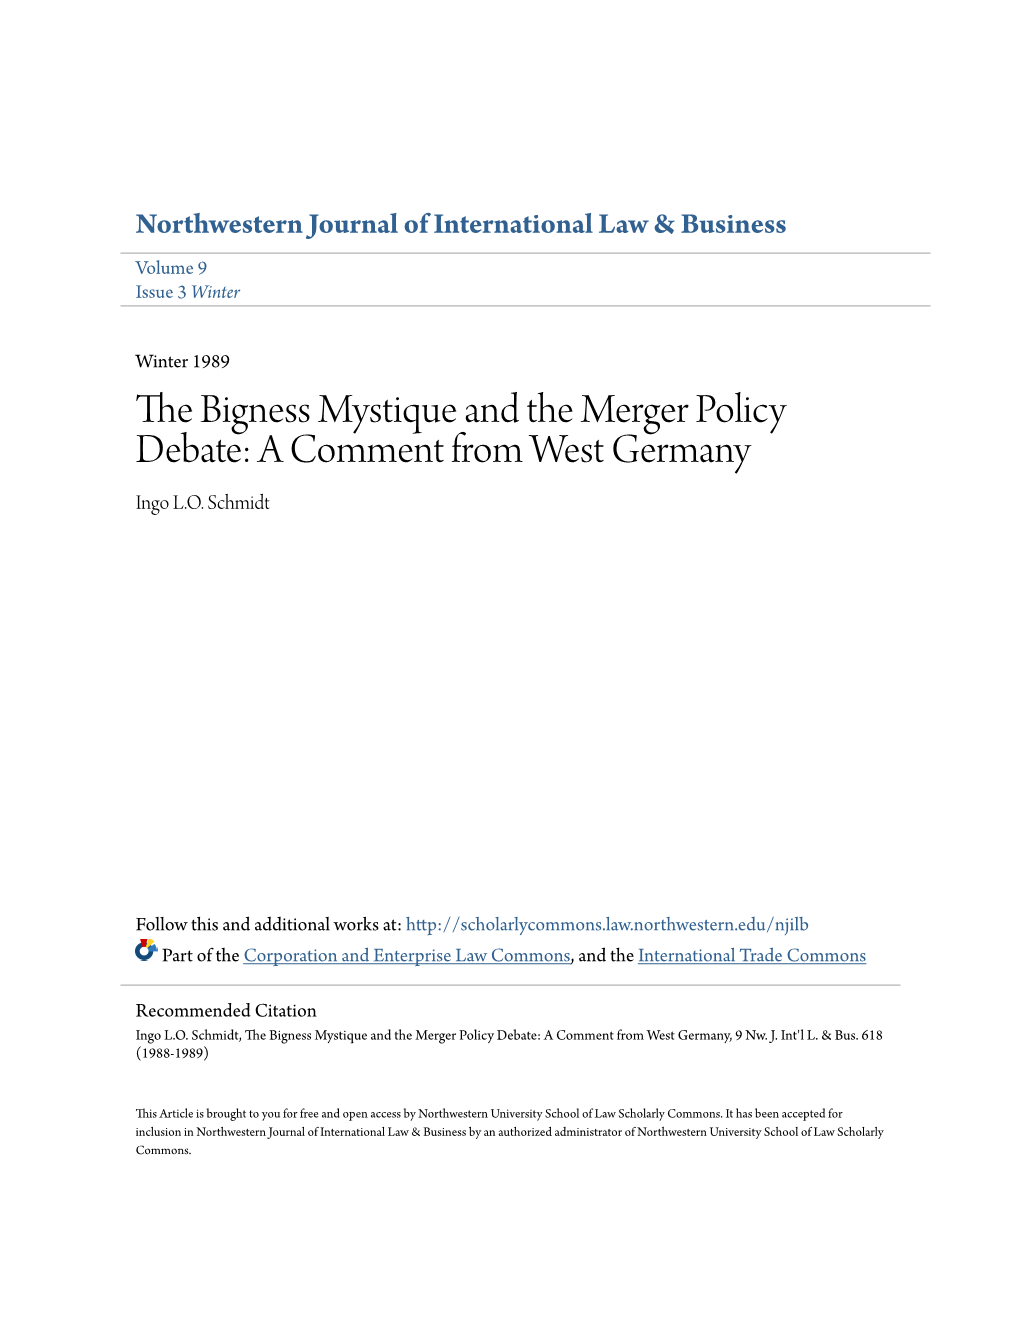 The Bigness Mystique and the Merger Policy Debate: a Comment from West Germany